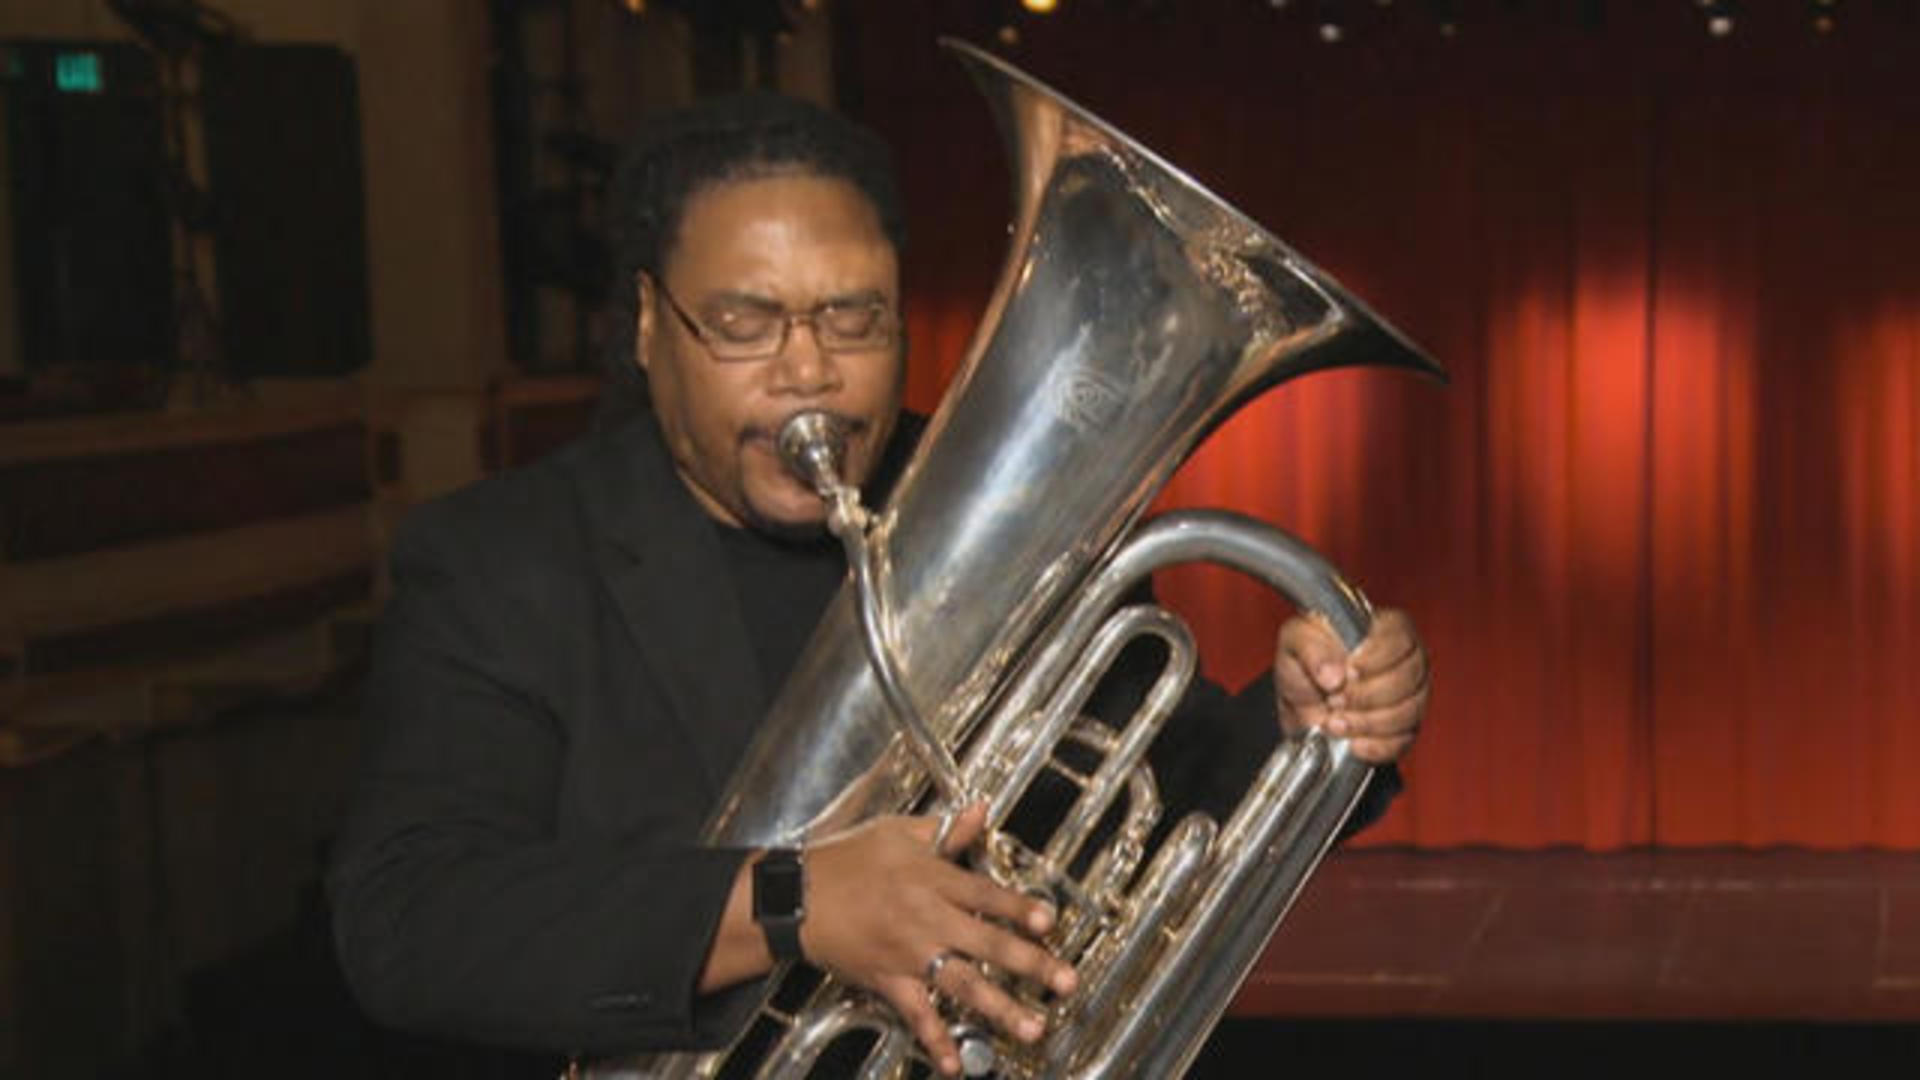 Tuba player finds harmony after overcoming homelessness - CBS News